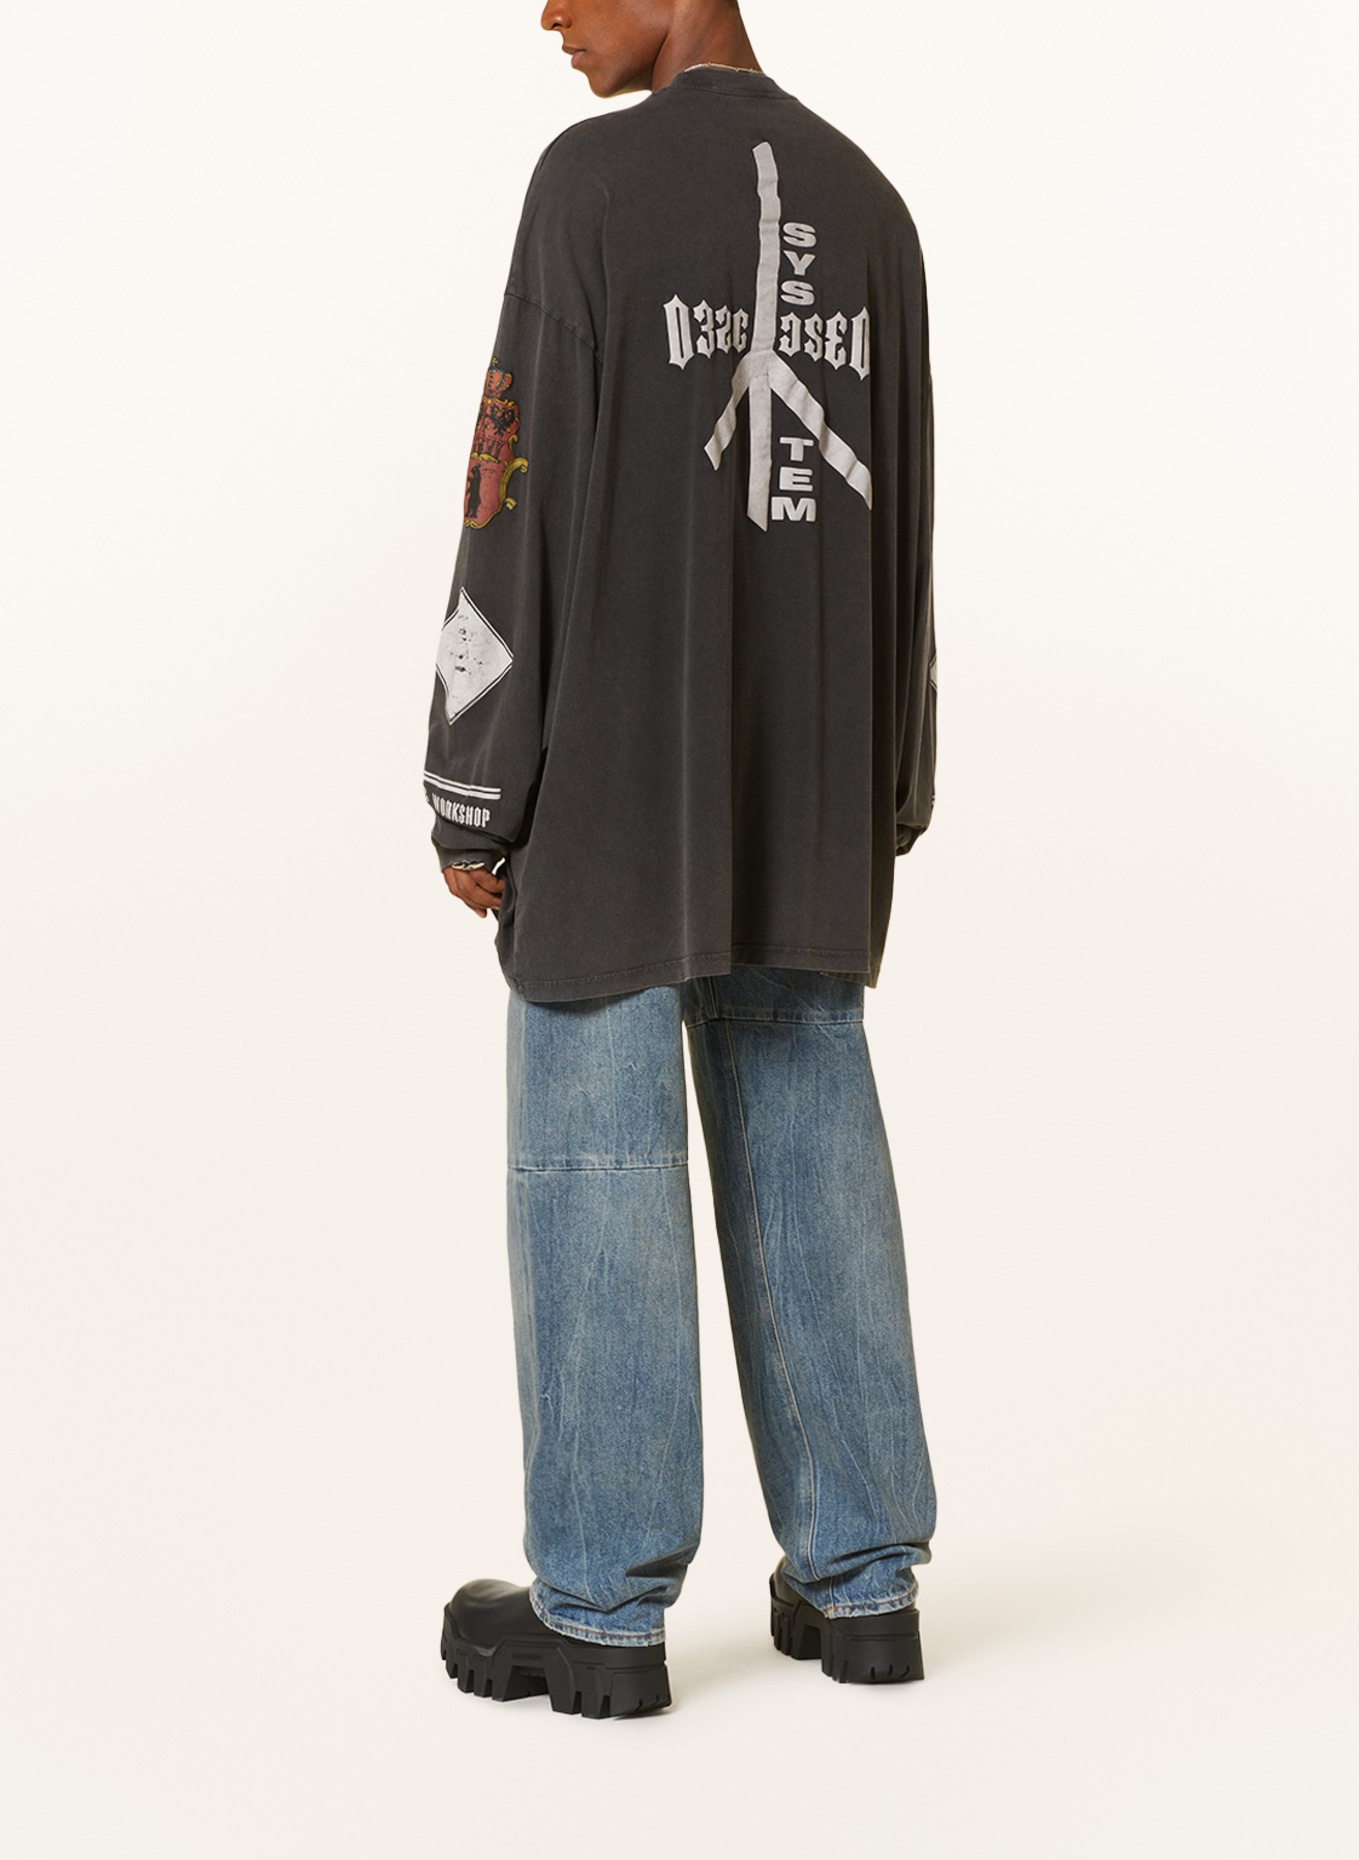 032c Oversized shirt RECOLLECTION, Color: DARK GRAY/ LIGHT GRAY (Image 2)